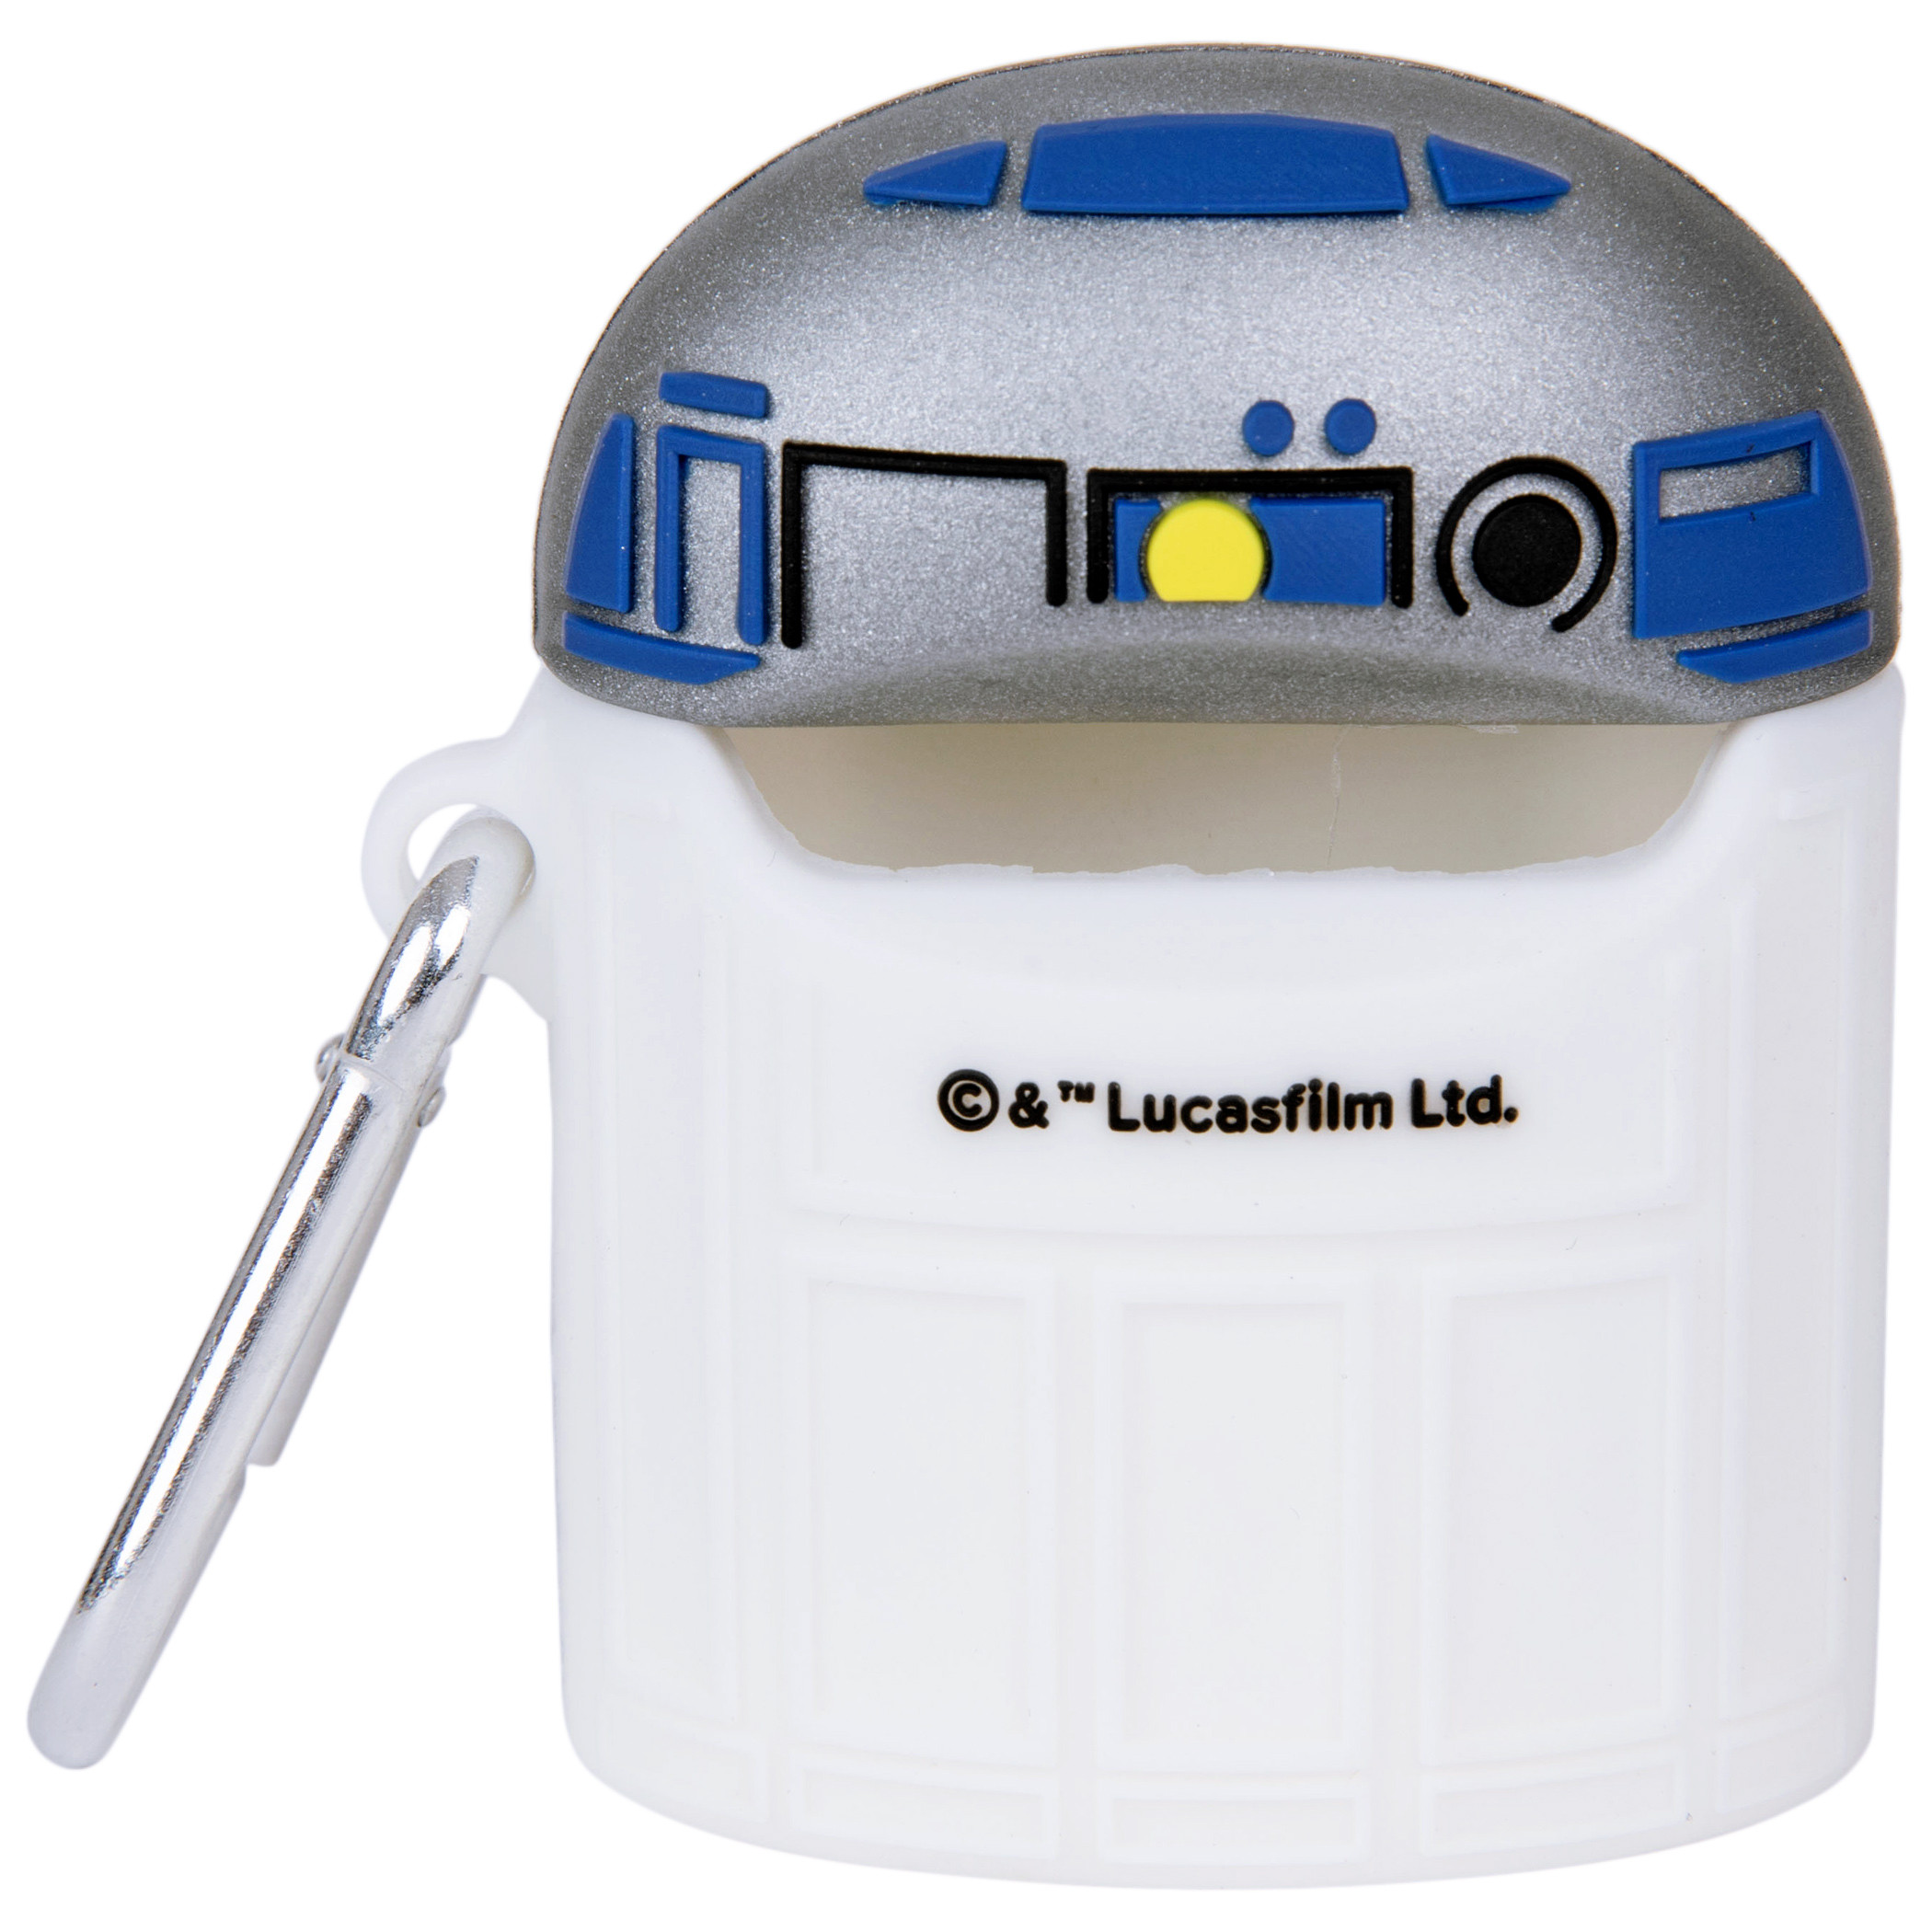 Star Wars R2-D2 Cosplay Airpods Case